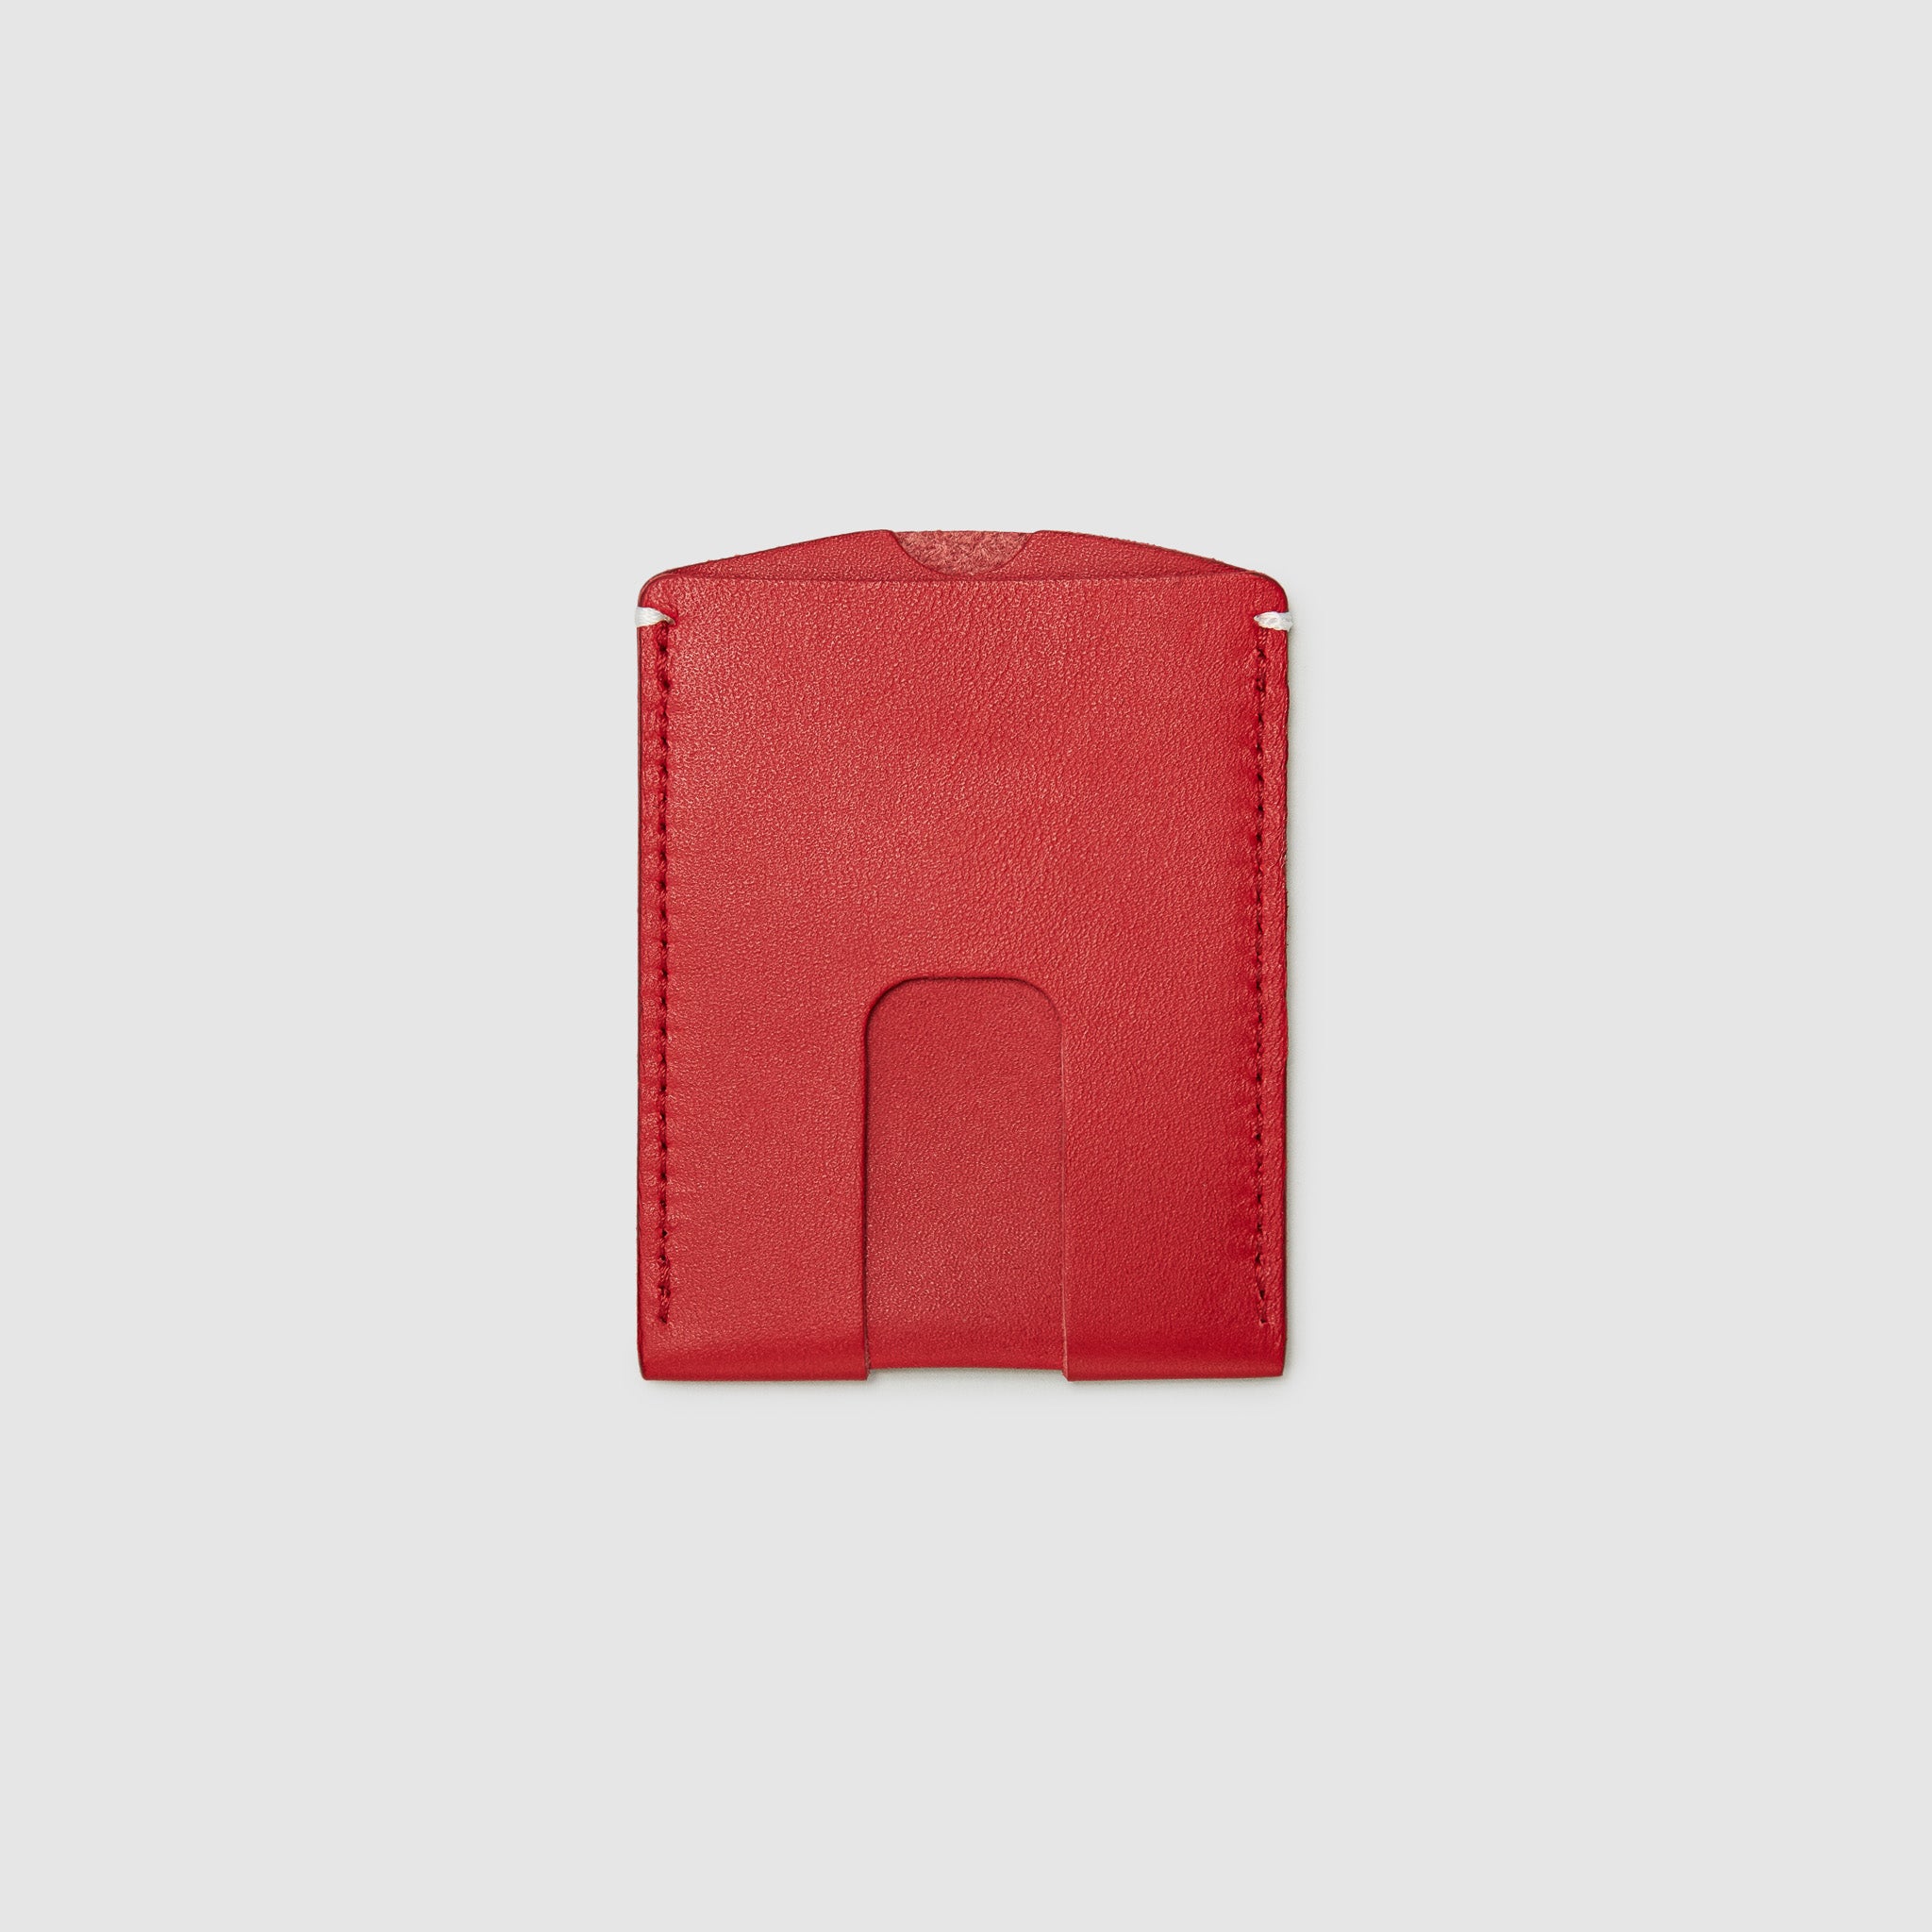 Anson Calder Card Holder Wallet french calfskin leather _red